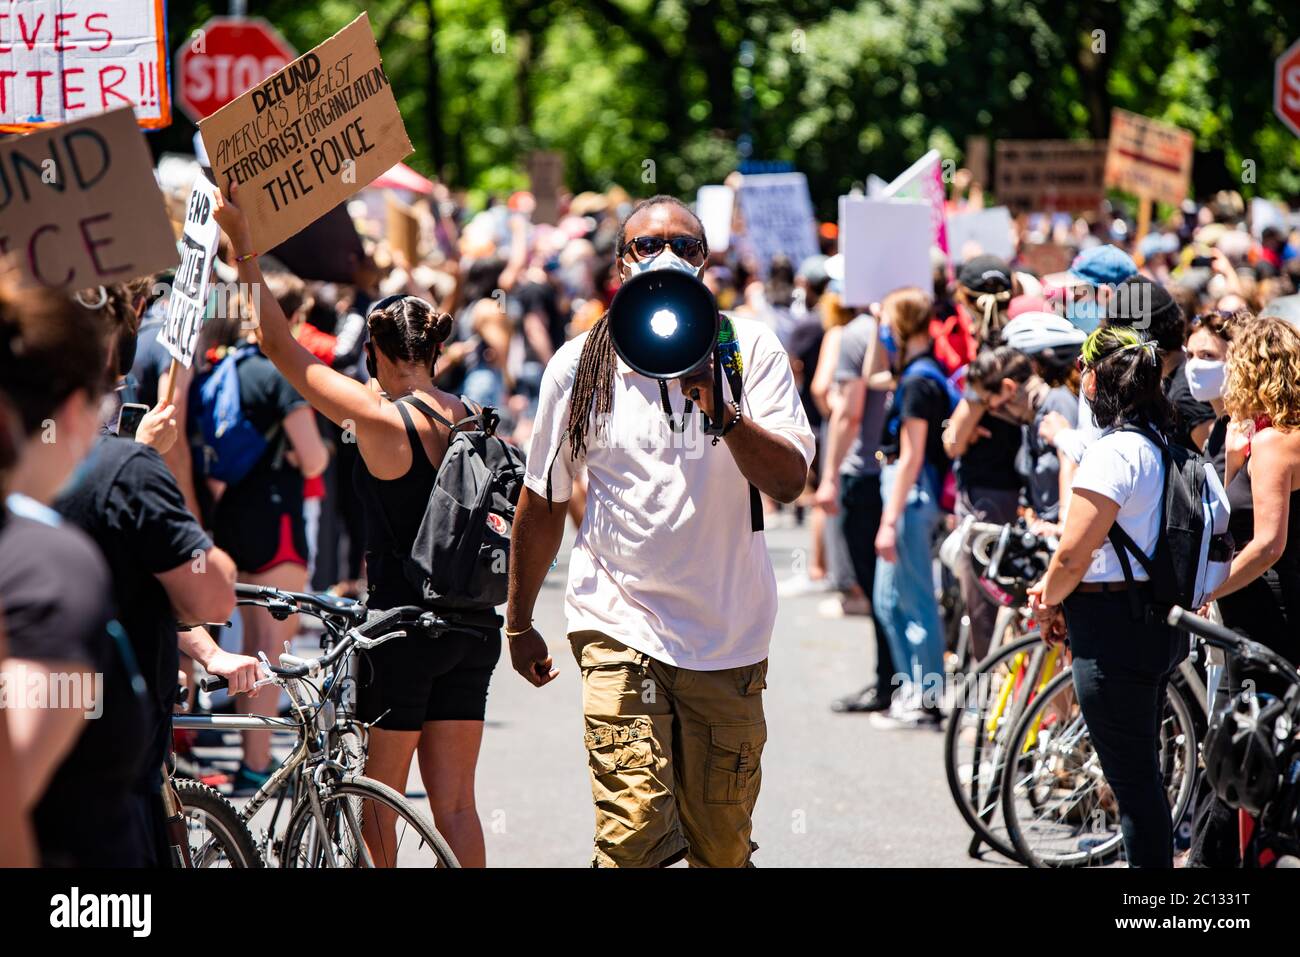 Philadelphia, PA / USA. Hundreds gathered at the site of the former MOVE community to demand an end to police violence. The MOVE community was bombed by Philadelphia Police under the orders of Mayor Street, the first Black Mayor of Philadelphia, on May 13, 1985. June 13 2020. Credit: Christopher Evens / Alamy Live News Stock Photo